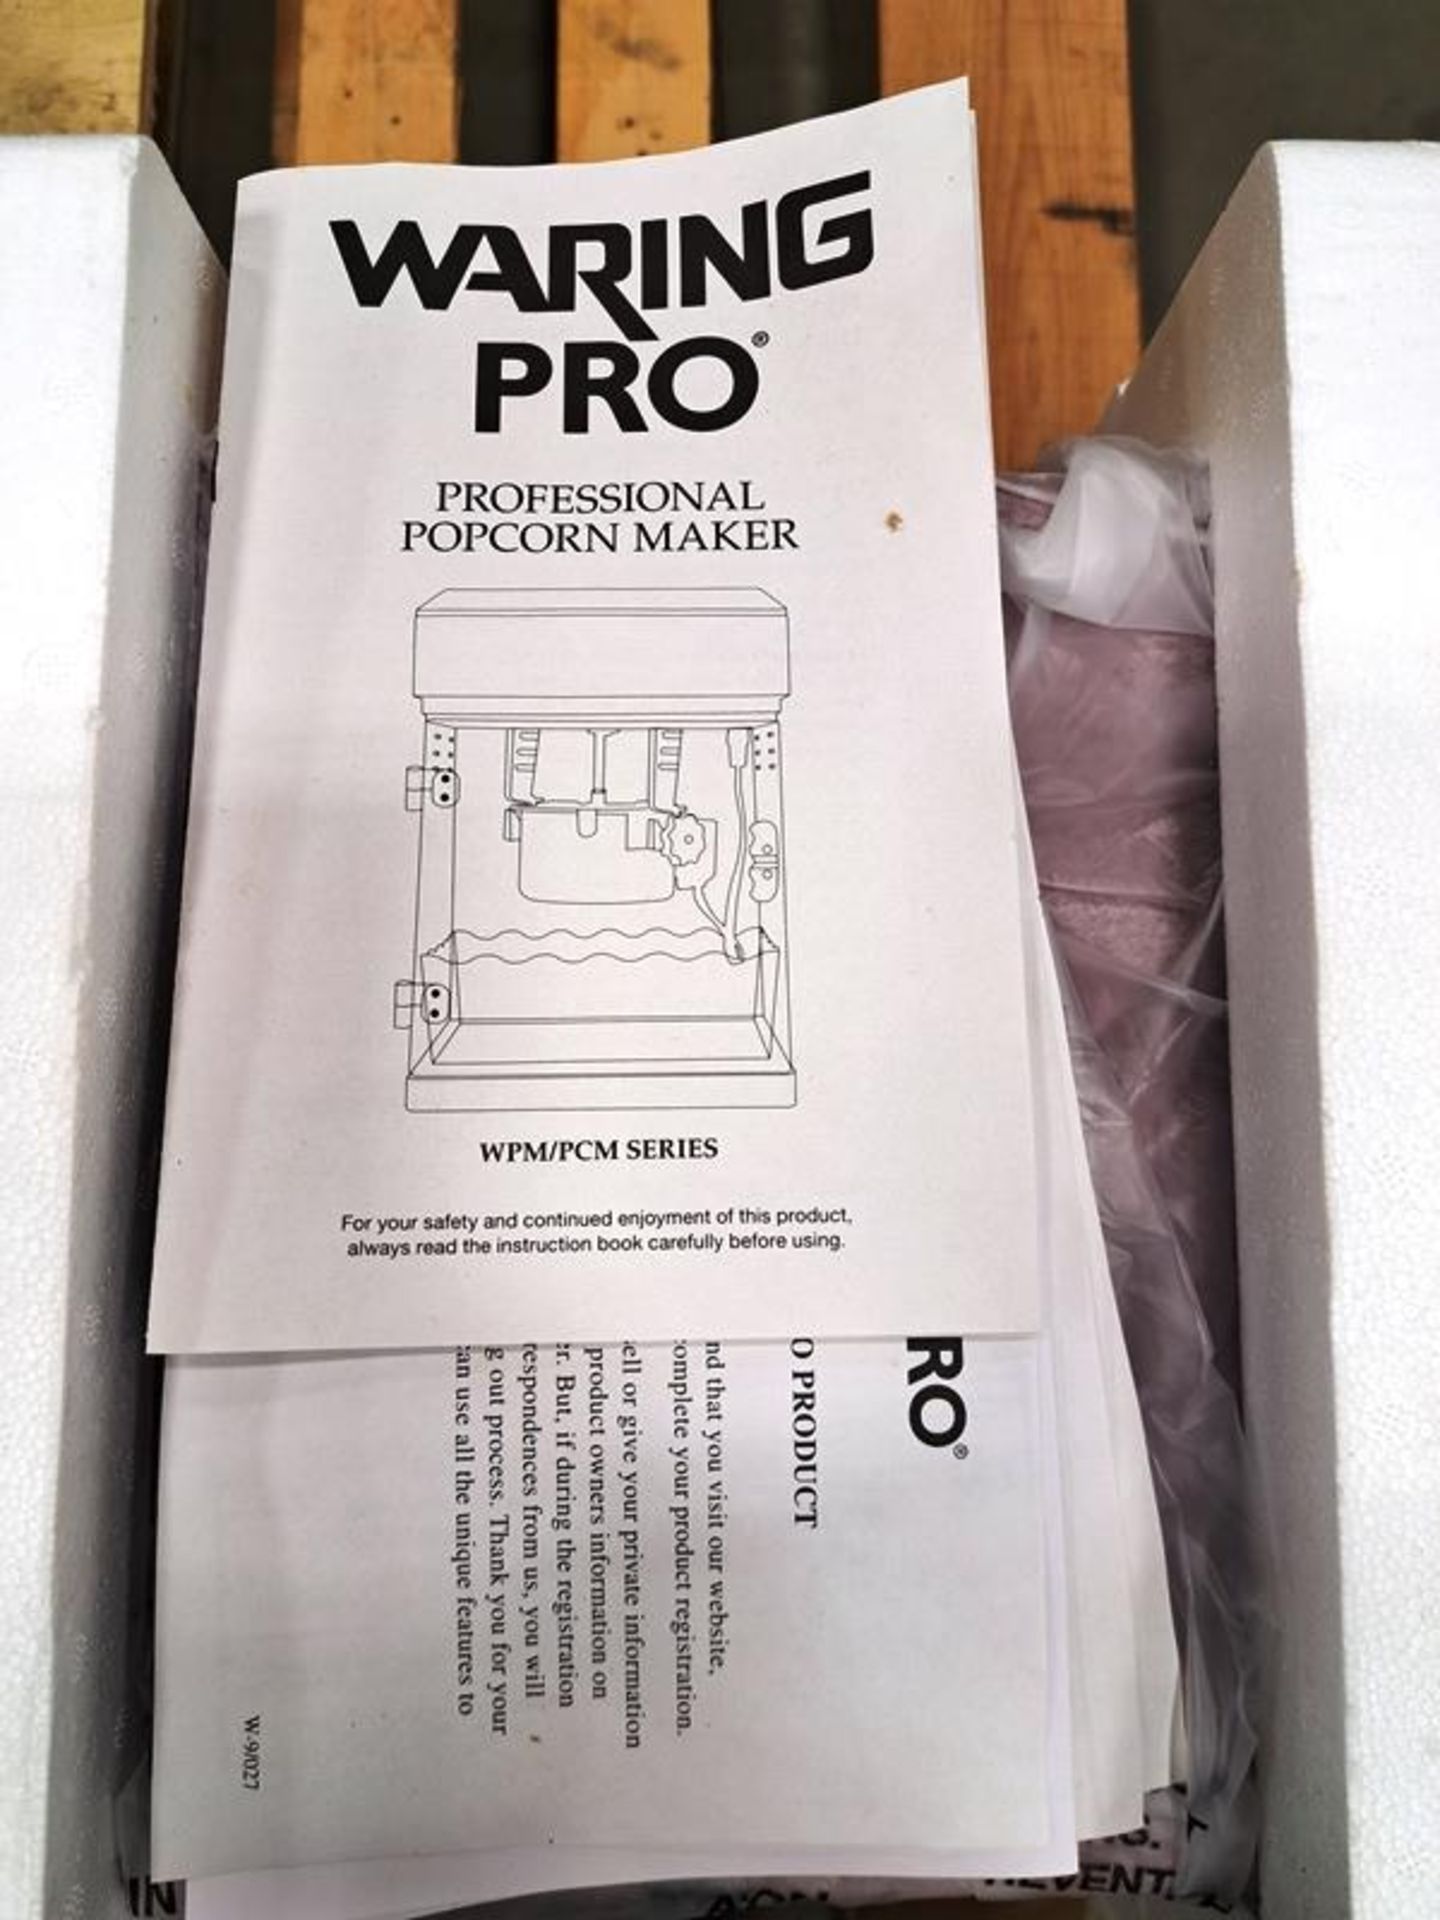 Waring Pro Professional Popcorn Maker, unused, in box (Required Loading Fee: $25.00) NO HAND - Image 2 of 3